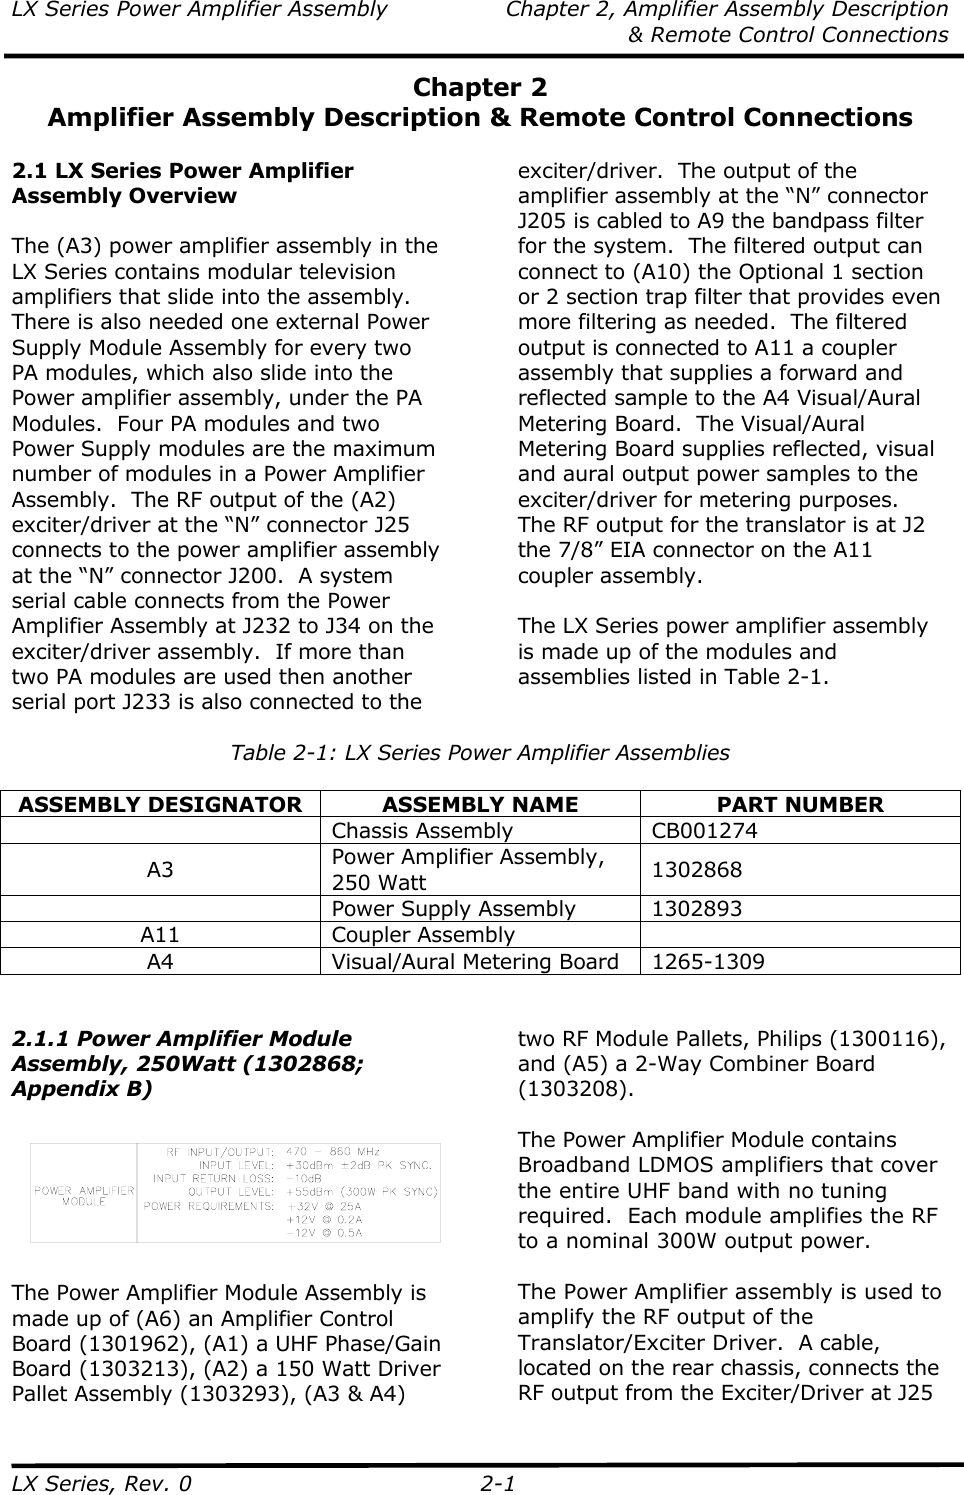 LX Series Power Amplifier Assembly  Chapter 2, Amplifier Assembly Description   &amp; Remote Control Connections LX Series, Rev. 0  2-1 Chapter 2 Amplifier Assembly Description &amp; Remote Control Connections  2.1 LX Series Power Amplifier Assembly Overview  The (A3) power amplifier assembly in the LX Series contains modular television amplifiers that slide into the assembly.  There is also needed one external Power Supply Module Assembly for every two PA modules, which also slide into the Power amplifier assembly, under the PA Modules.  Four PA modules and two Power Supply modules are the maximum number of modules in a Power Amplifier Assembly.  The RF output of the (A2) exciter/driver at the “N” connector J25 connects to the power amplifier assembly at the “N” connector J200.  A system serial cable connects from the Power Amplifier Assembly at J232 to J34 on the exciter/driver assembly.  If more than two PA modules are used then another serial port J233 is also connected to the exciter/driver.  The output of the amplifier assembly at the “N” connector J205 is cabled to A9 the bandpass filter for the system.  The filtered output can connect to (A10) the Optional 1 section or 2 section trap filter that provides even more filtering as needed.  The filtered output is connected to A11 a coupler assembly that supplies a forward and reflected sample to the A4 Visual/Aural Metering Board.  The Visual/Aural Metering Board supplies reflected, visual and aural output power samples to the exciter/driver for metering purposes.  The RF output for the translator is at J2 the 7/8” EIA connector on the A11 coupler assembly.  The LX Series power amplifier assembly is made up of the modules and assemblies listed in Table 2-1.  Table 2-1: LX Series Power Amplifier Assemblies  ASSEMBLY DESIGNATOR  ASSEMBLY NAME  PART NUMBER  Chassis Assembly CB001274 A3  Power Amplifier Assembly, 250 Watt  1302868   Power Supply Assembly  1302893 A11 Coupler Assembly  A4 Visual/Aural Metering Board 1265-1309   2.1.1 Power Amplifier Module Assembly, 250Watt (1302868; Appendix B)    The Power Amplifier Module Assembly is made up of (A6) an Amplifier Control Board (1301962), (A1) a UHF Phase/Gain Board (1303213), (A2) a 150 Watt Driver Pallet Assembly (1303293), (A3 &amp; A4) two RF Module Pallets, Philips (1300116), and (A5) a 2-Way Combiner Board (1303208).  The Power Amplifier Module contains Broadband LDMOS amplifiers that cover the entire UHF band with no tuning required.  Each module amplifies the RF to a nominal 300W output power.  The Power Amplifier assembly is used to amplify the RF output of the Translator/Exciter Driver.  A cable, located on the rear chassis, connects the RF output from the Exciter/Driver at J25 